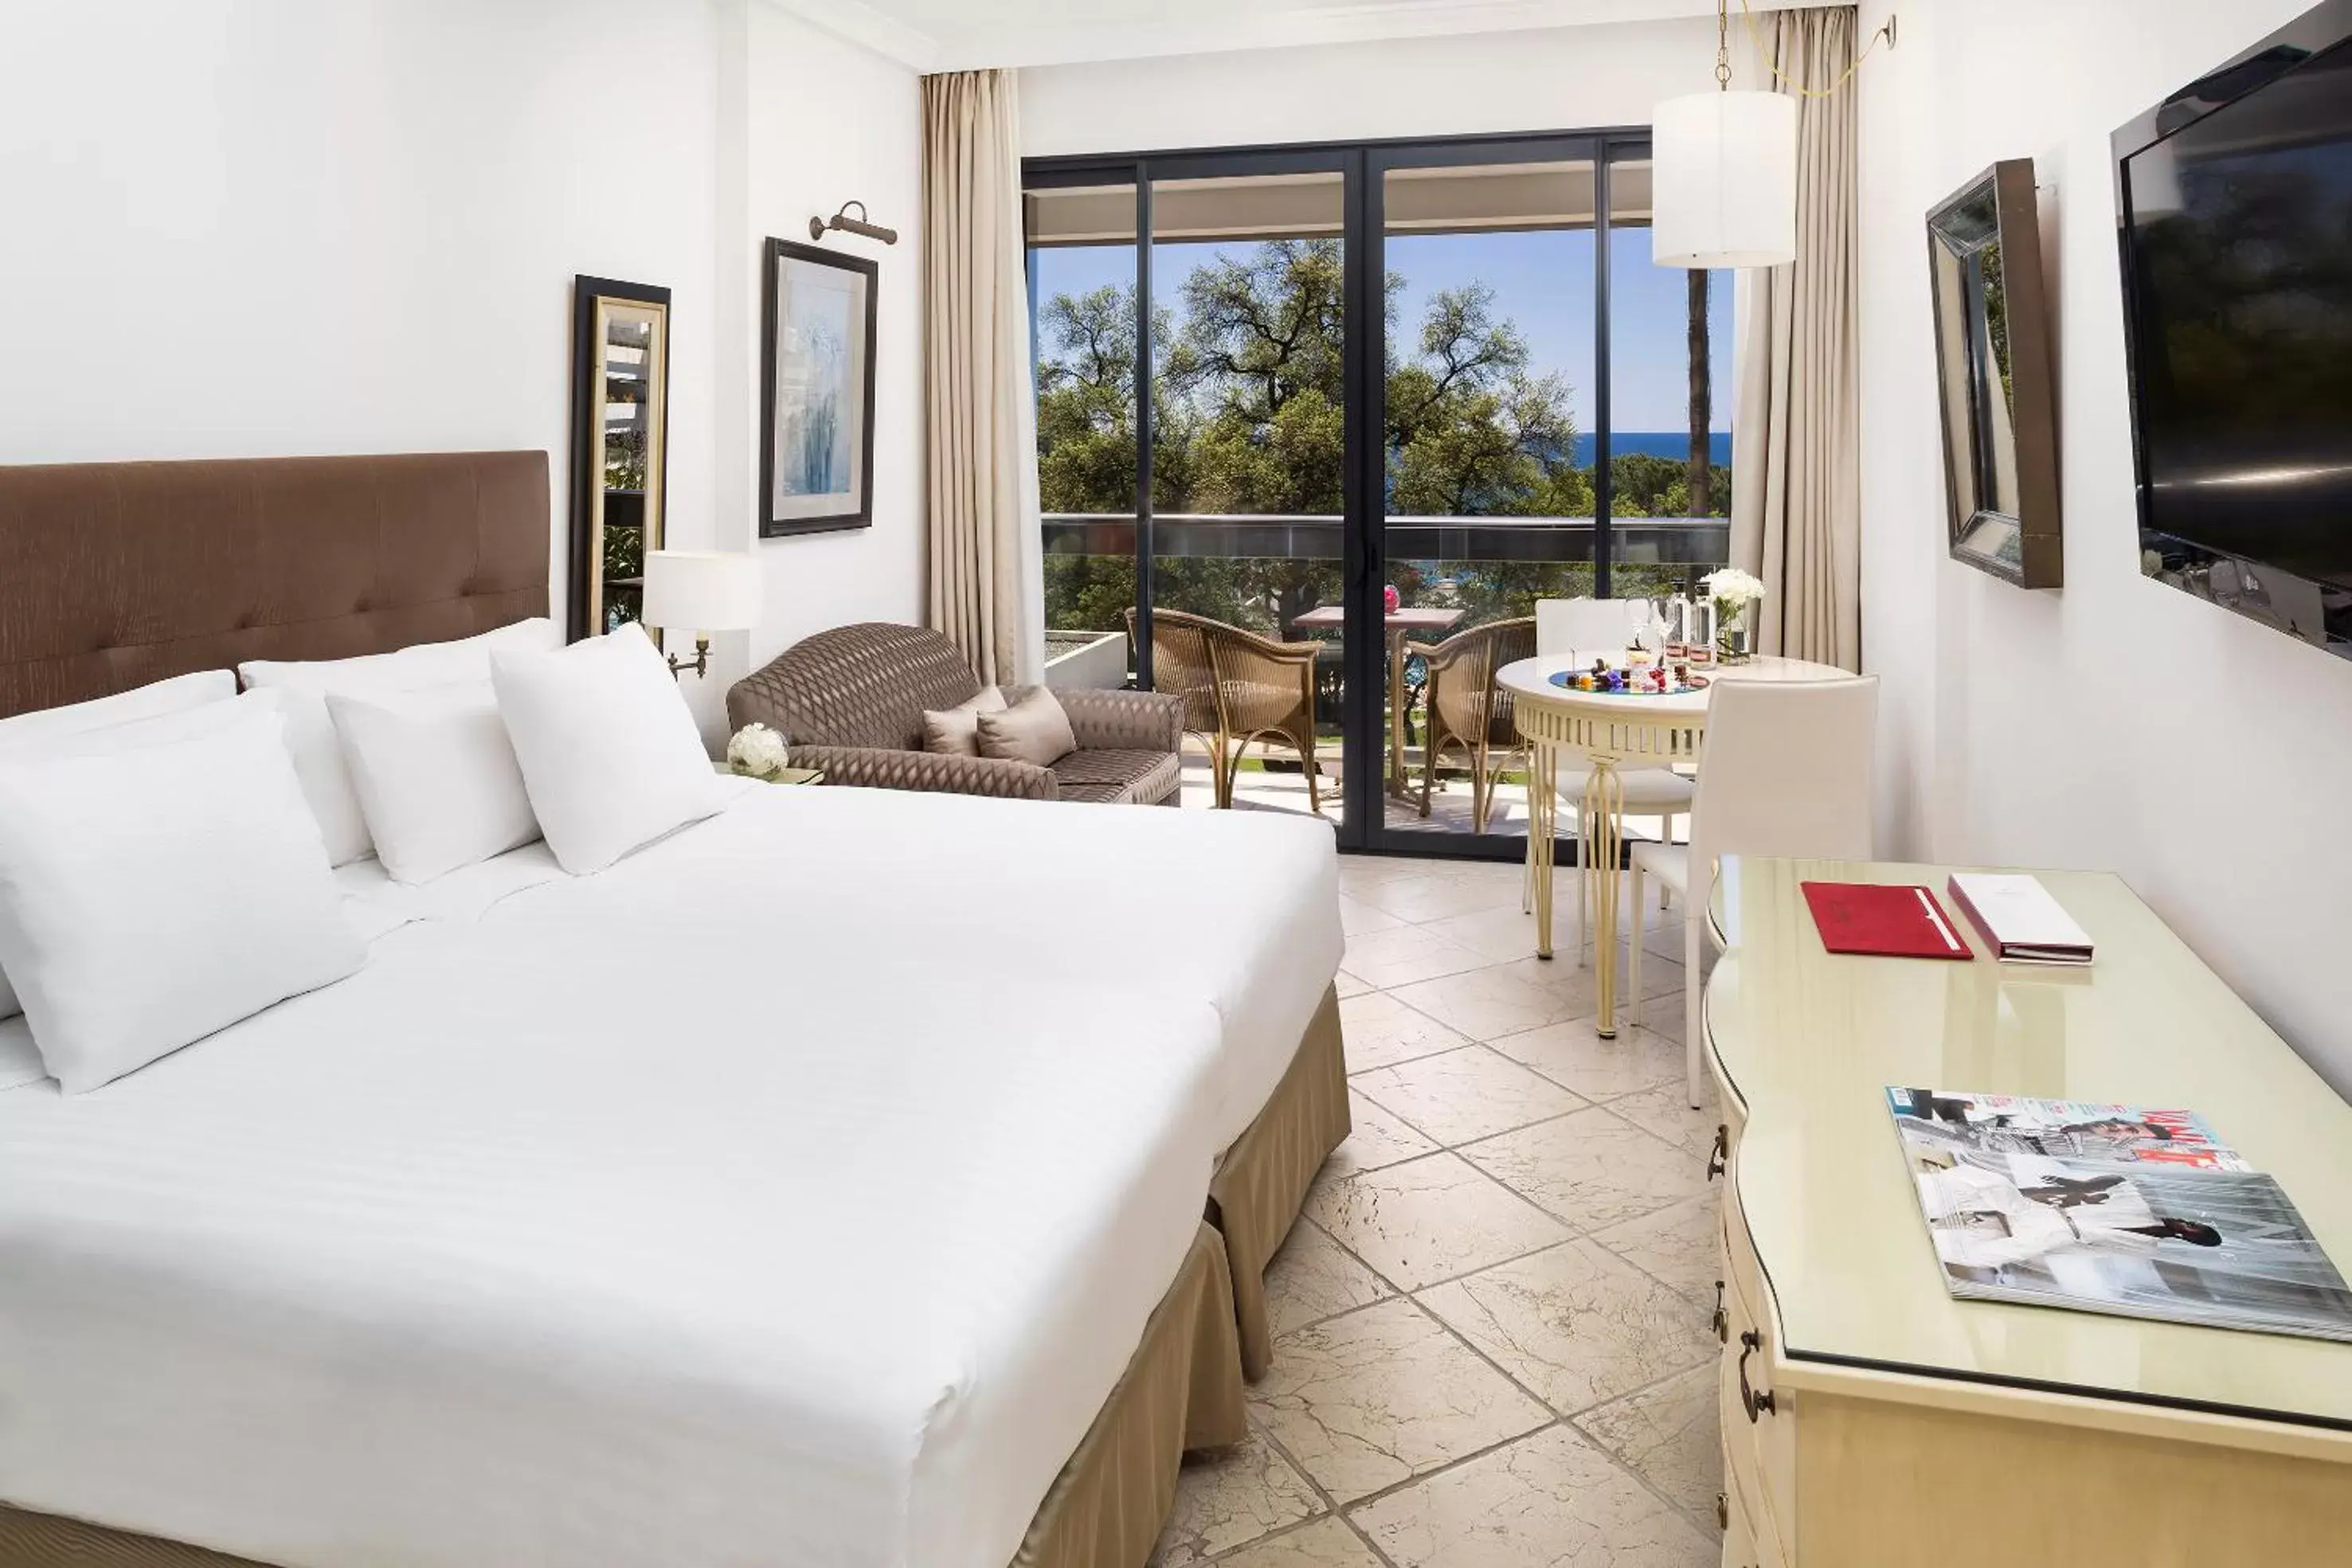 Premium Double Room with Garden View in Hotel Don Pepe Gran Meliá